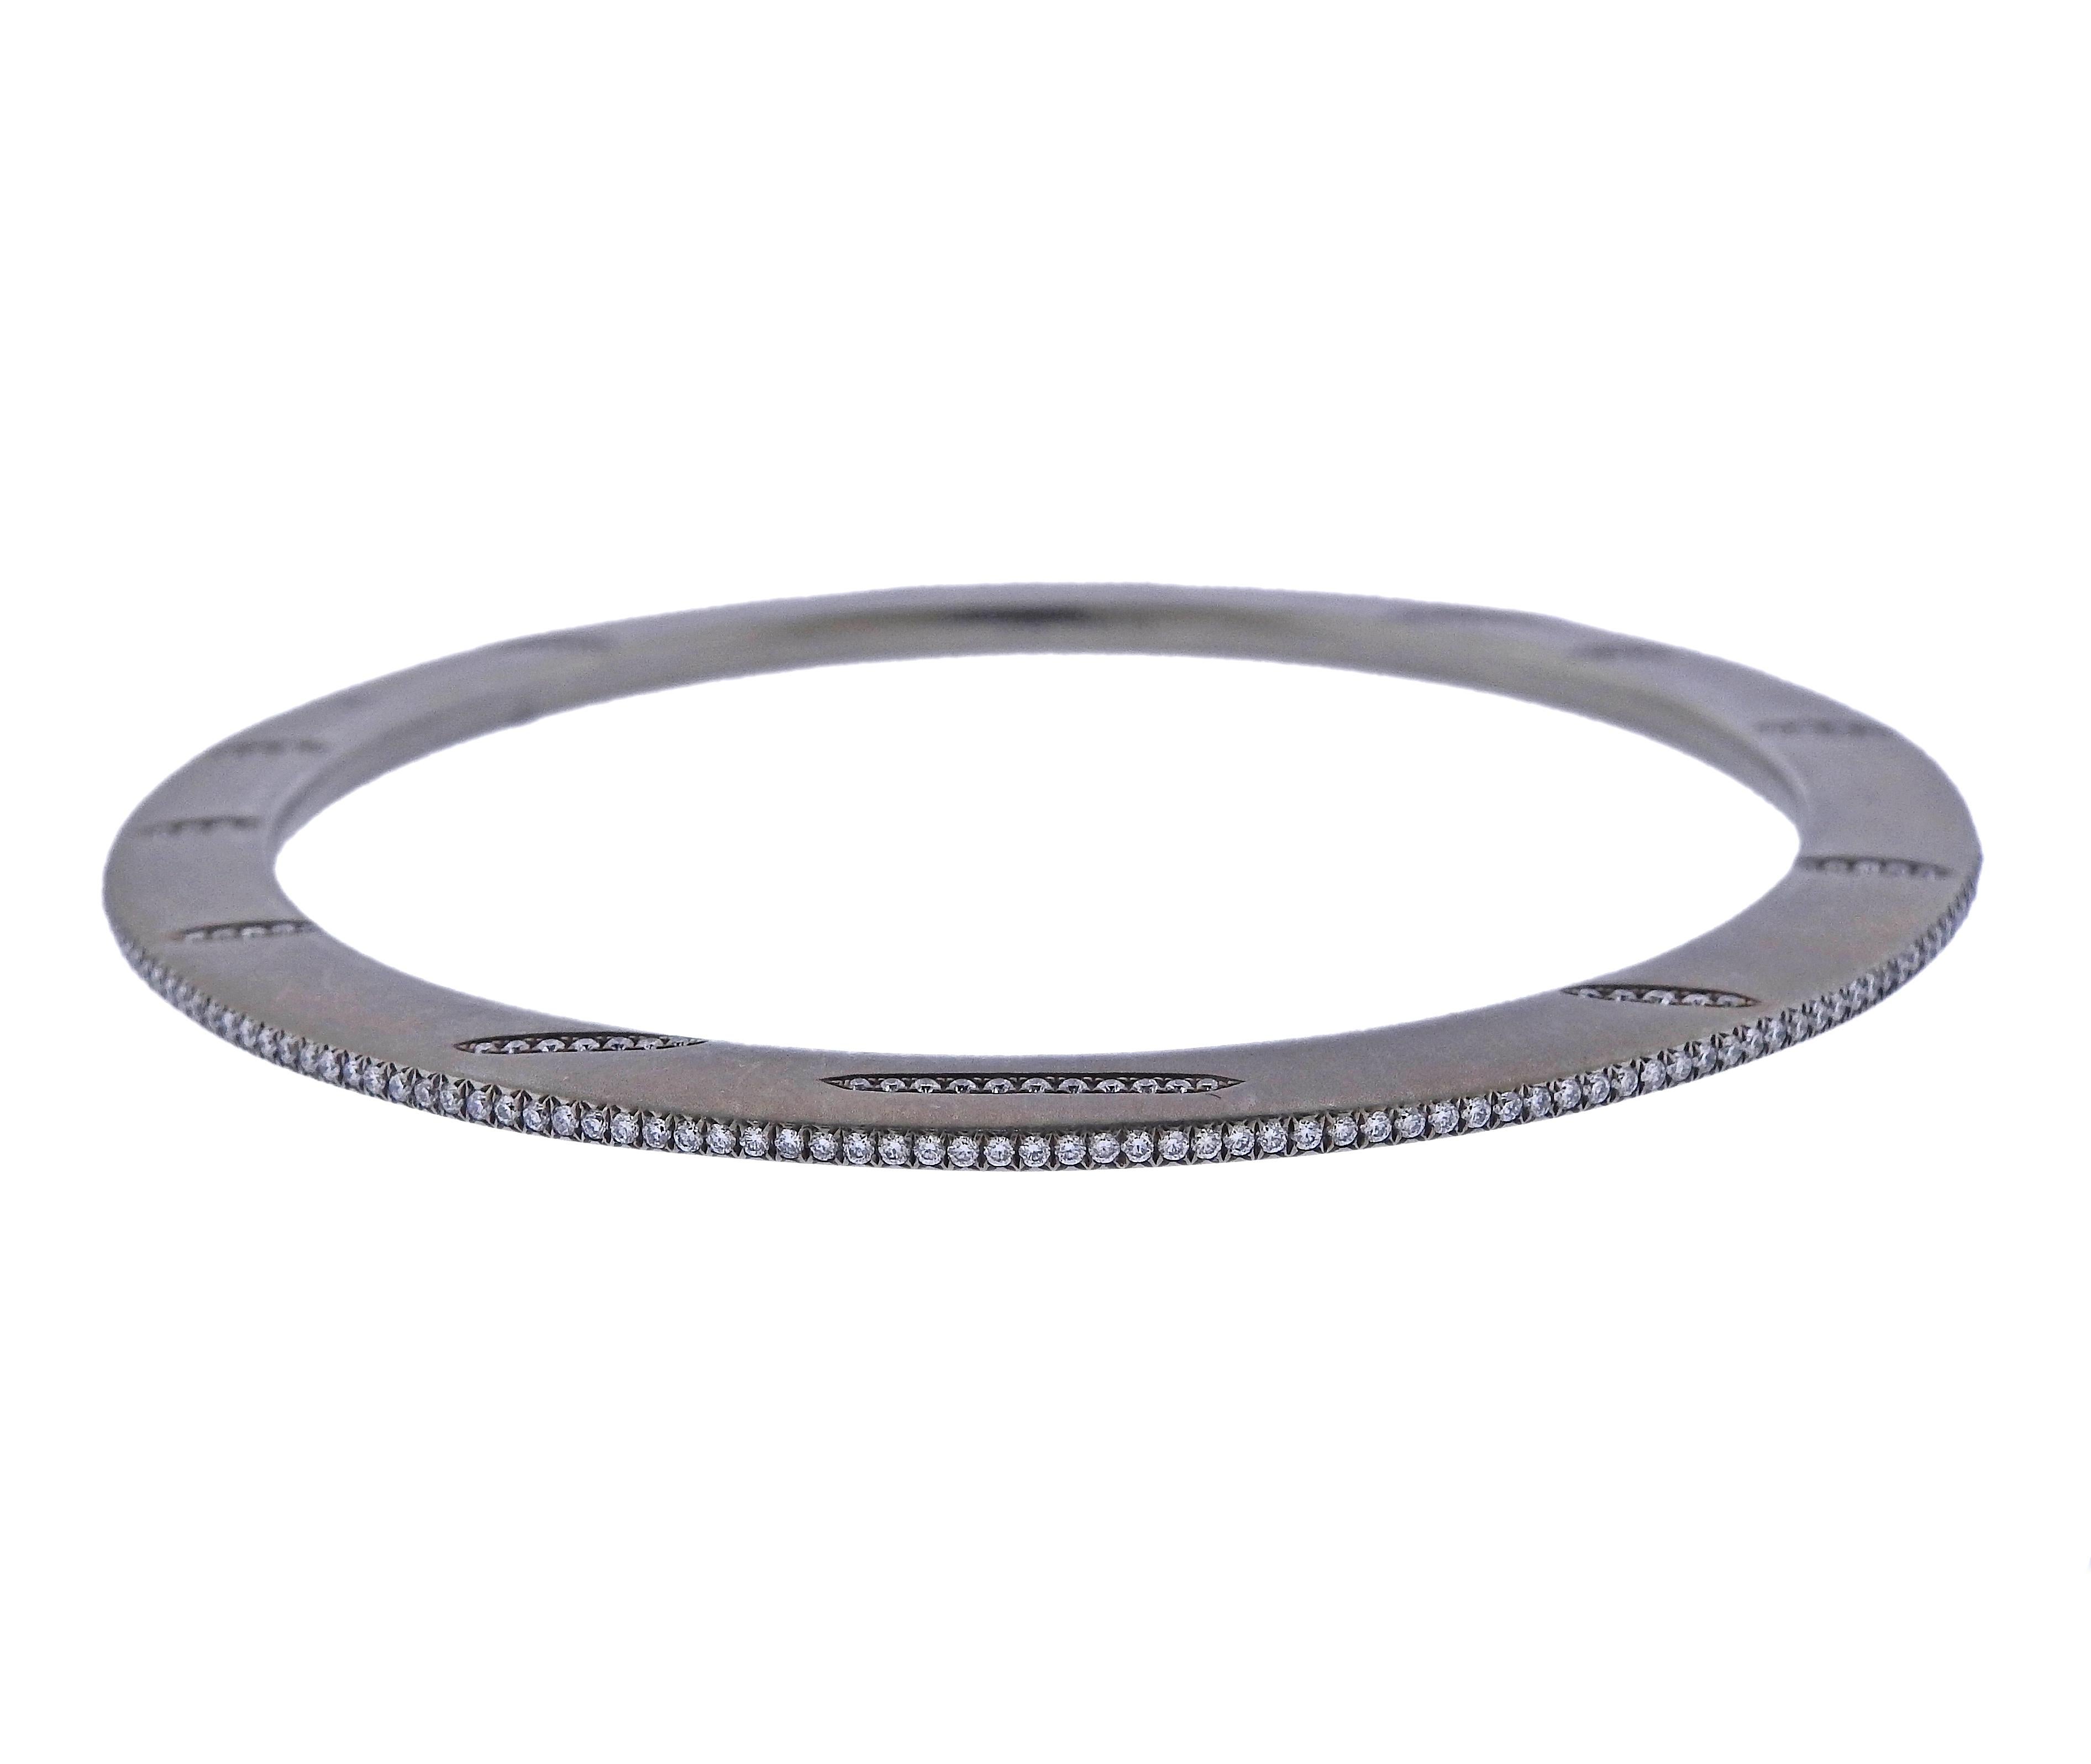 Italian made by La Reina, in titanium bangle bracelet, with 2.00ctw in diamonds. Bracelet will comfortably fit an approx. 7